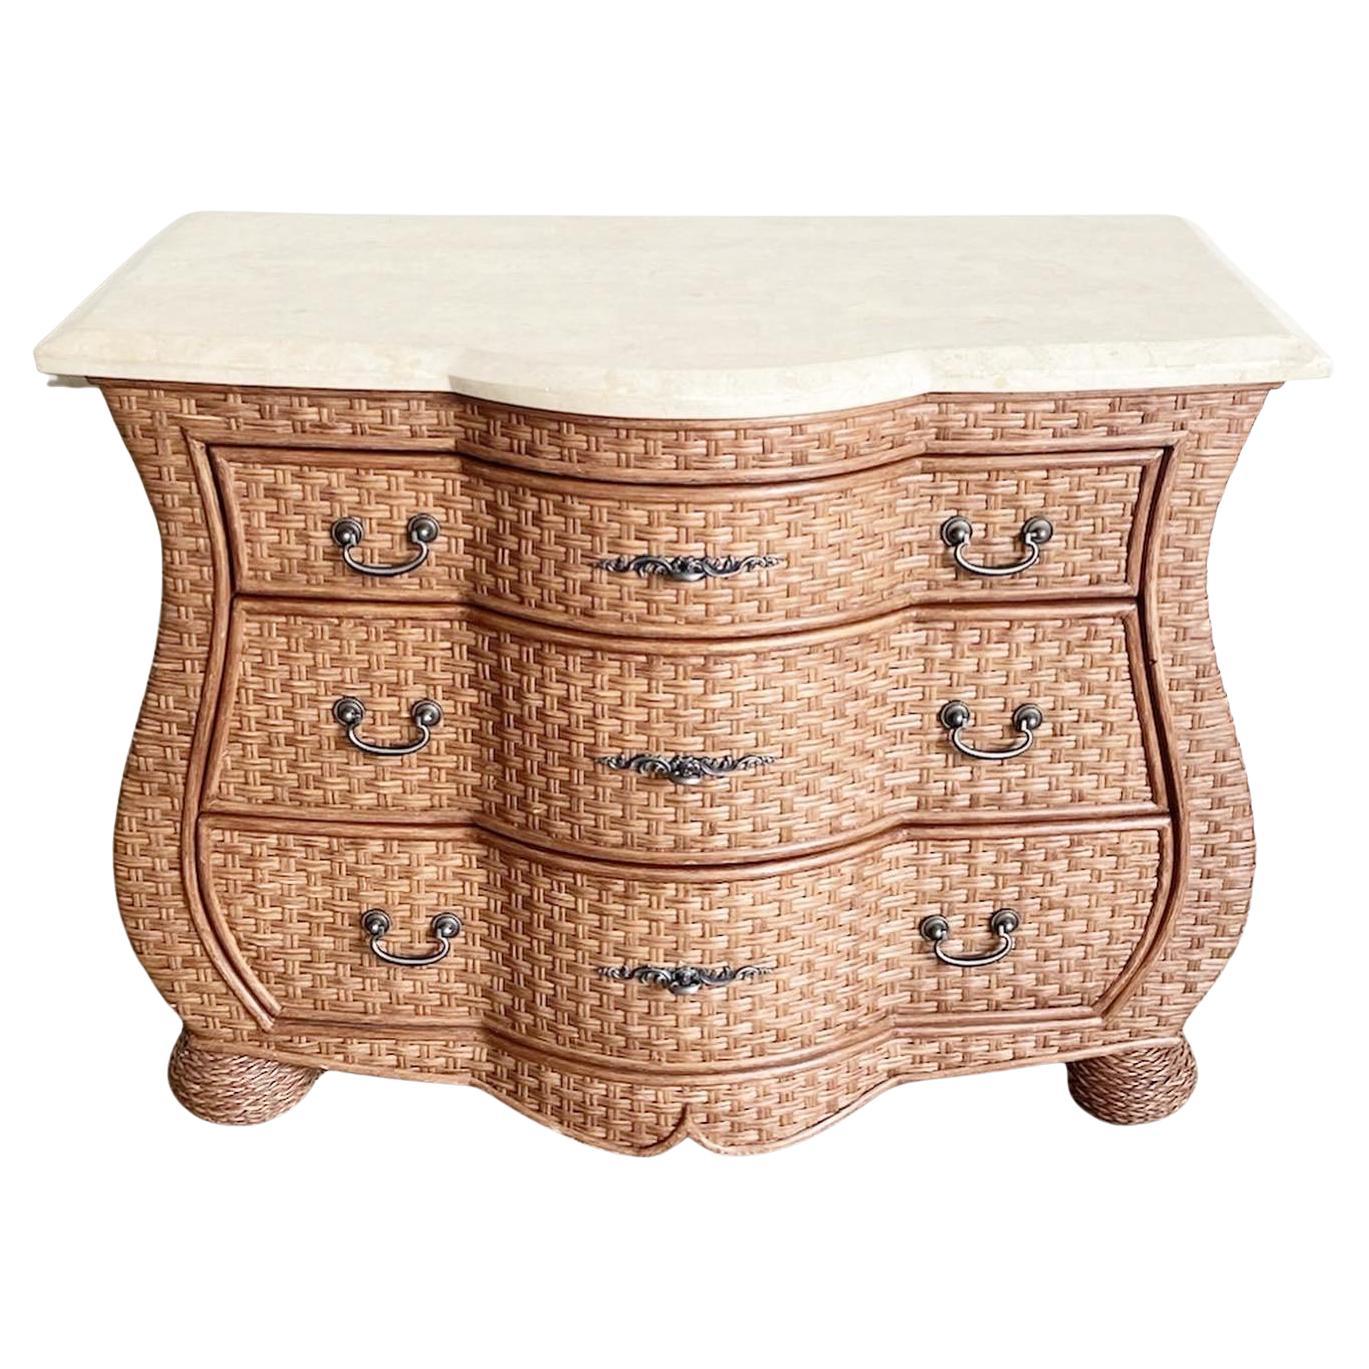 Boho Chic Wicker Tessellated Stone Top Chest of Drawers